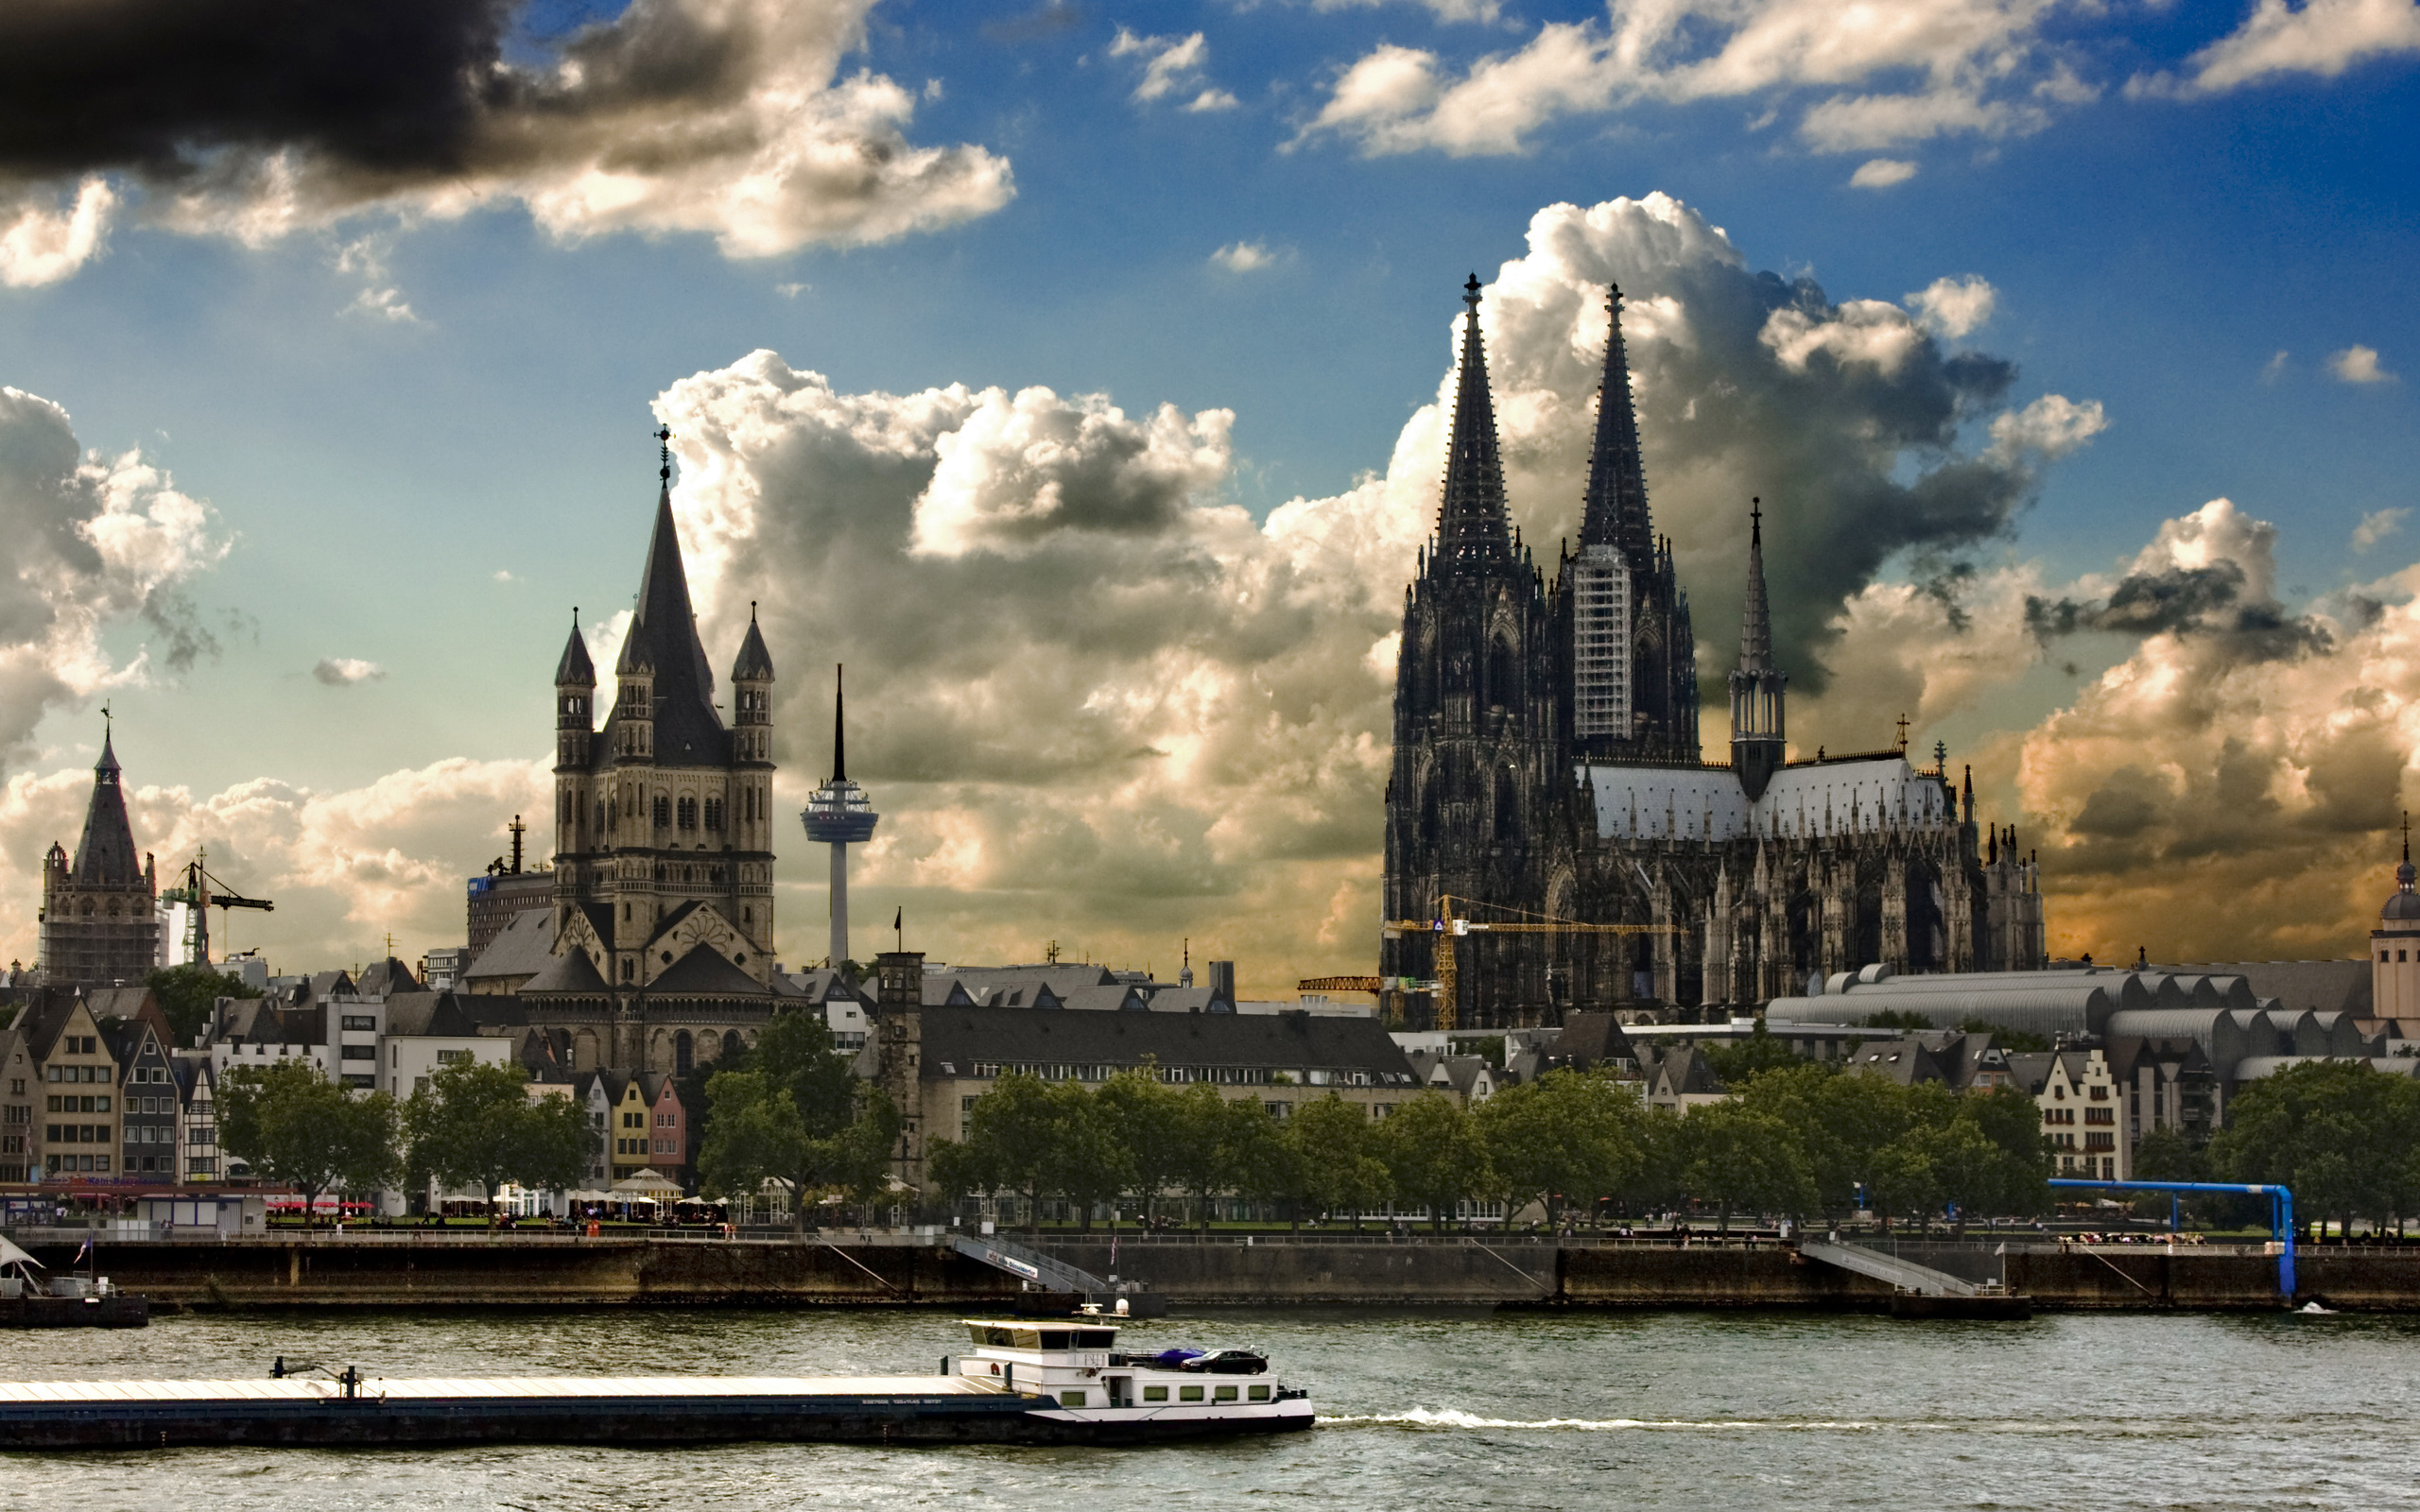 Cologne Cathedral wallpaper, Background images, Gothic architecture, Tourist attraction, 2560x1600 HD Desktop